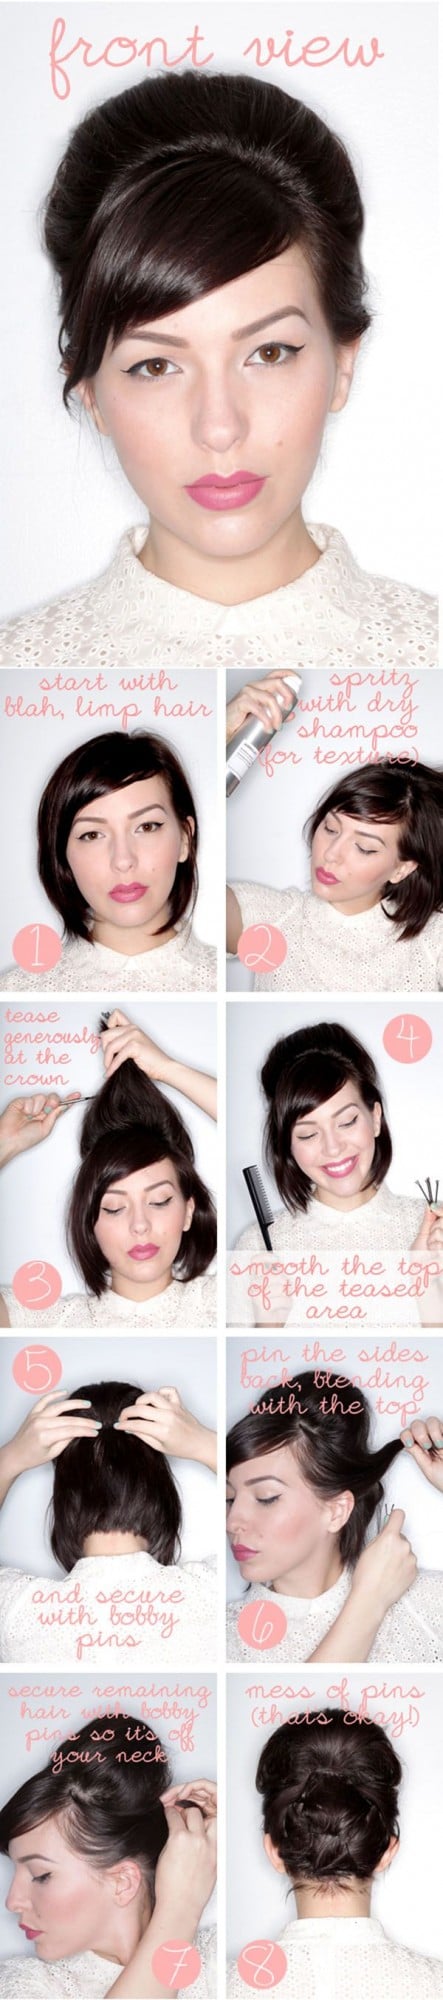 Great Short Hairstyle Ideas and Tutorials (7)